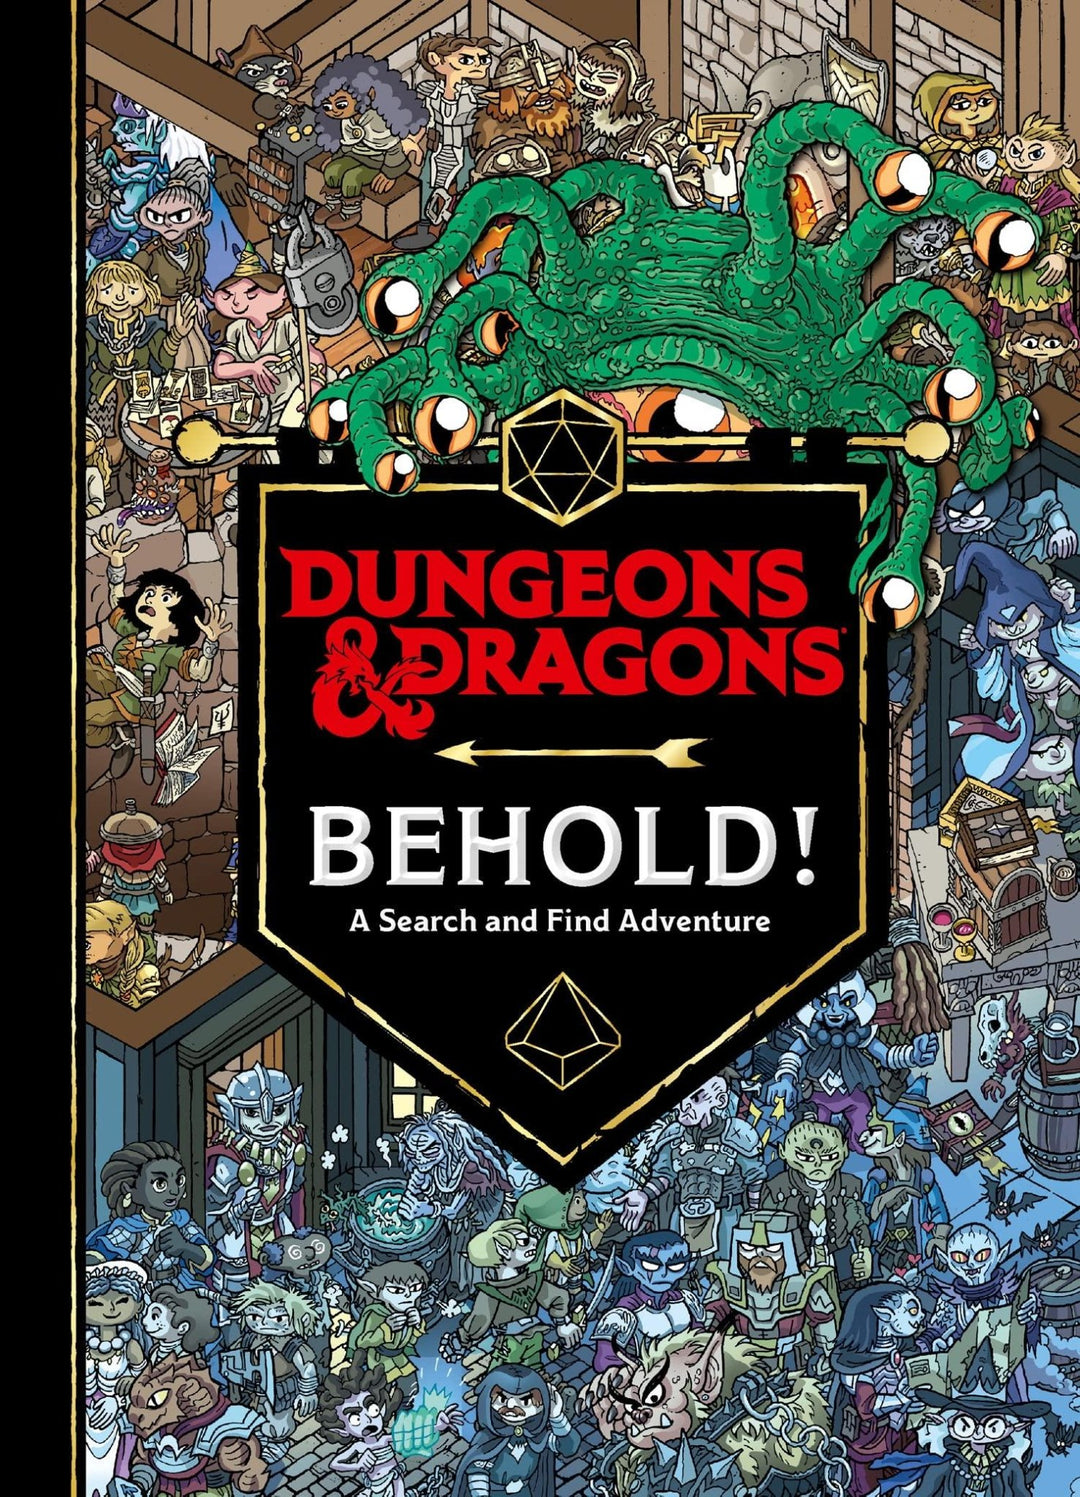 Dungeons & Dragons Behold! A Search and Find Adventure - Mini Megastore